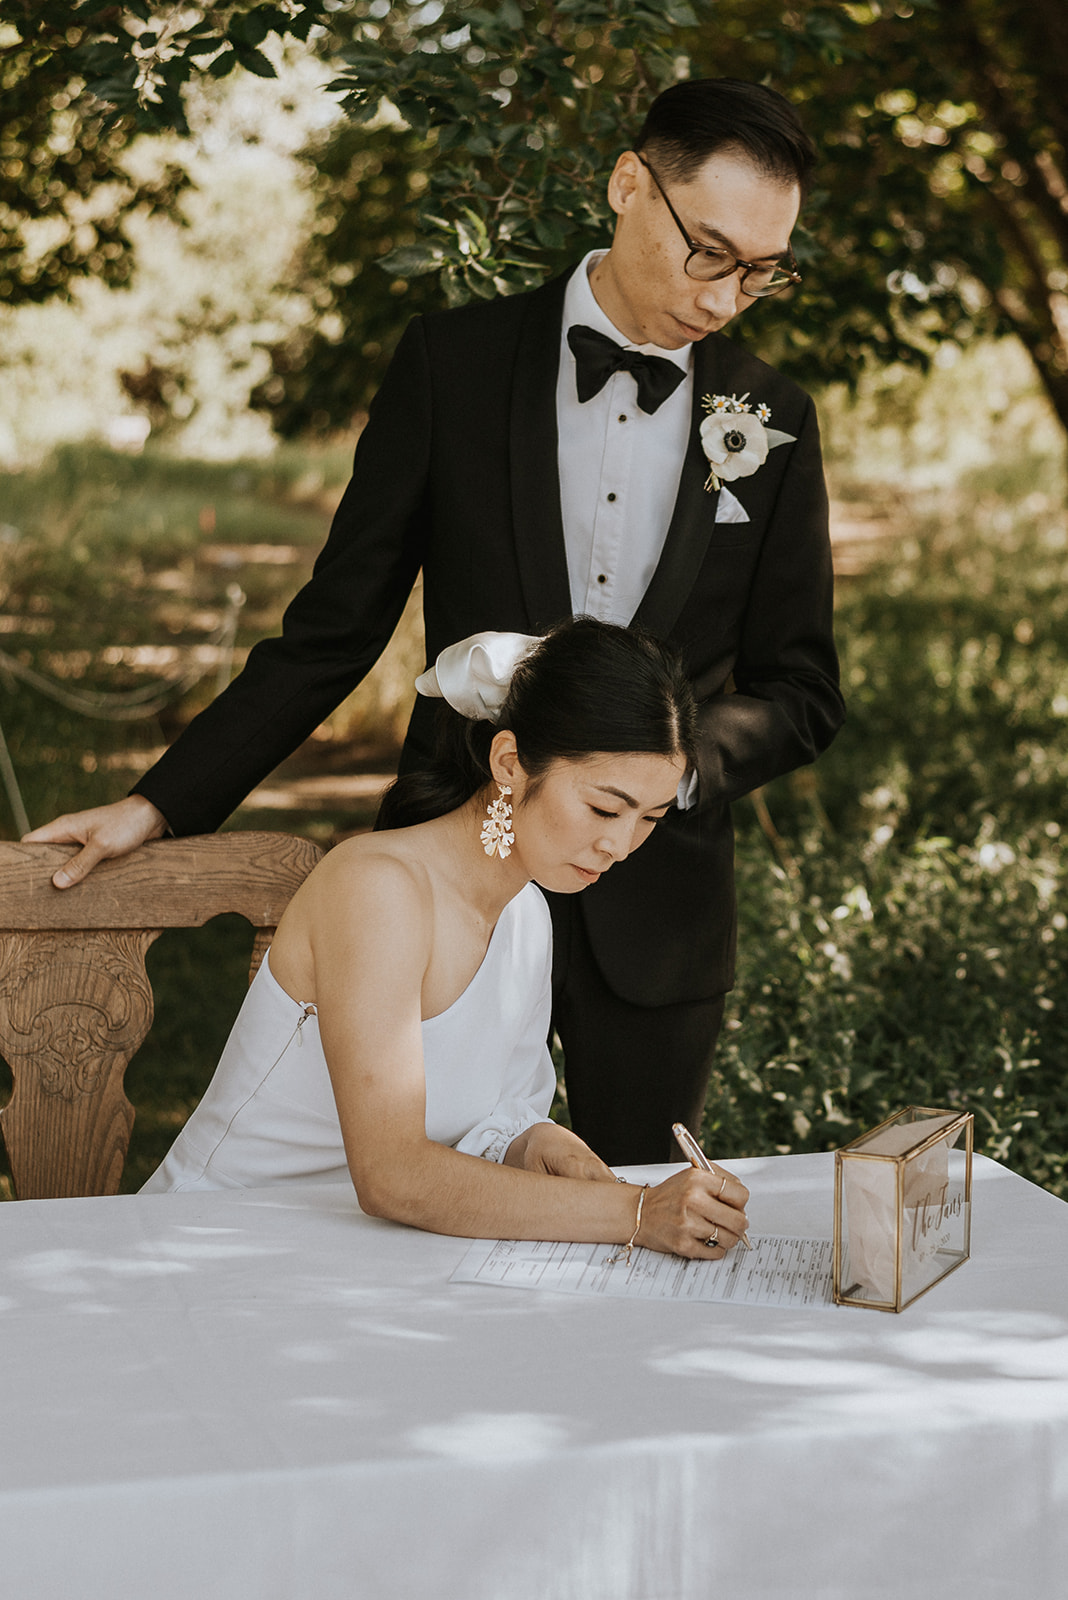 10 Things You Might Be Forgetting About When Planning Your Wedding | Brontë Bride // what most engaged couples forget, wedding planning advice, wedding advice, Canadian wedding planning blog, Canadian weddings, wedding resources, wedding checklist